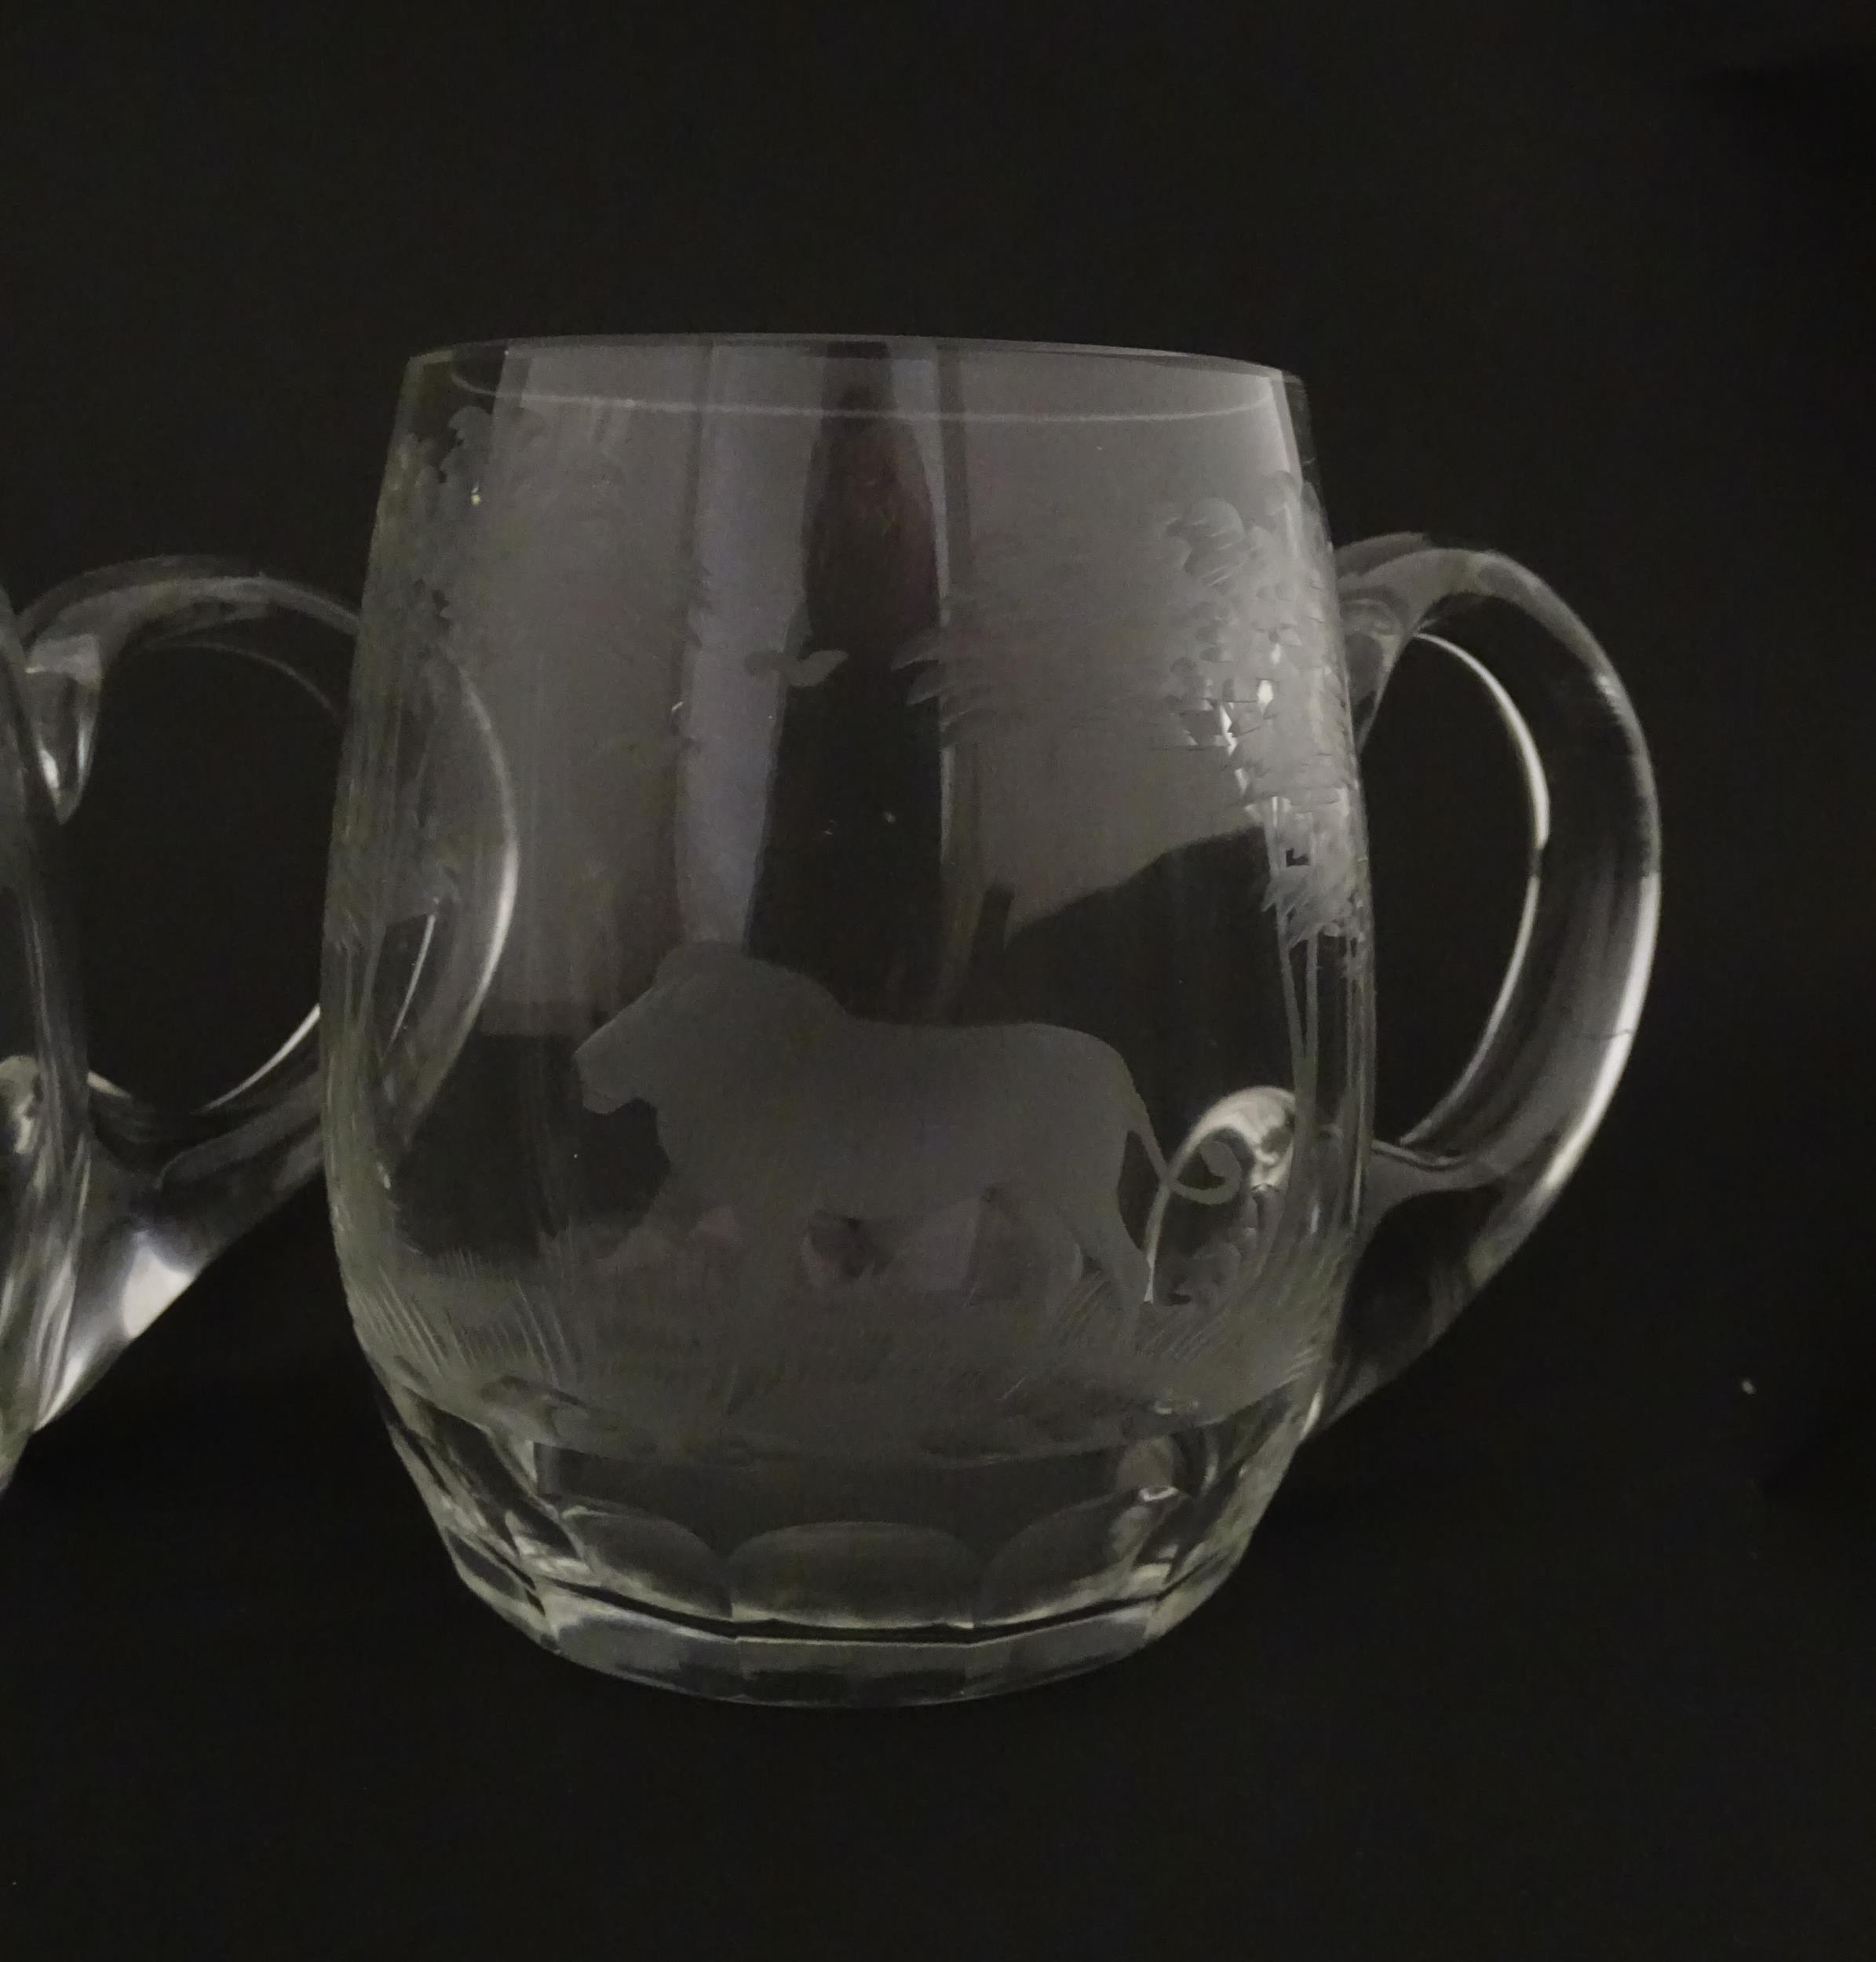 Seven Rowland Ward pint mugs / glasses with engraved Safari animal detail. Unsigned. Approx. 4 1/ - Image 7 of 26